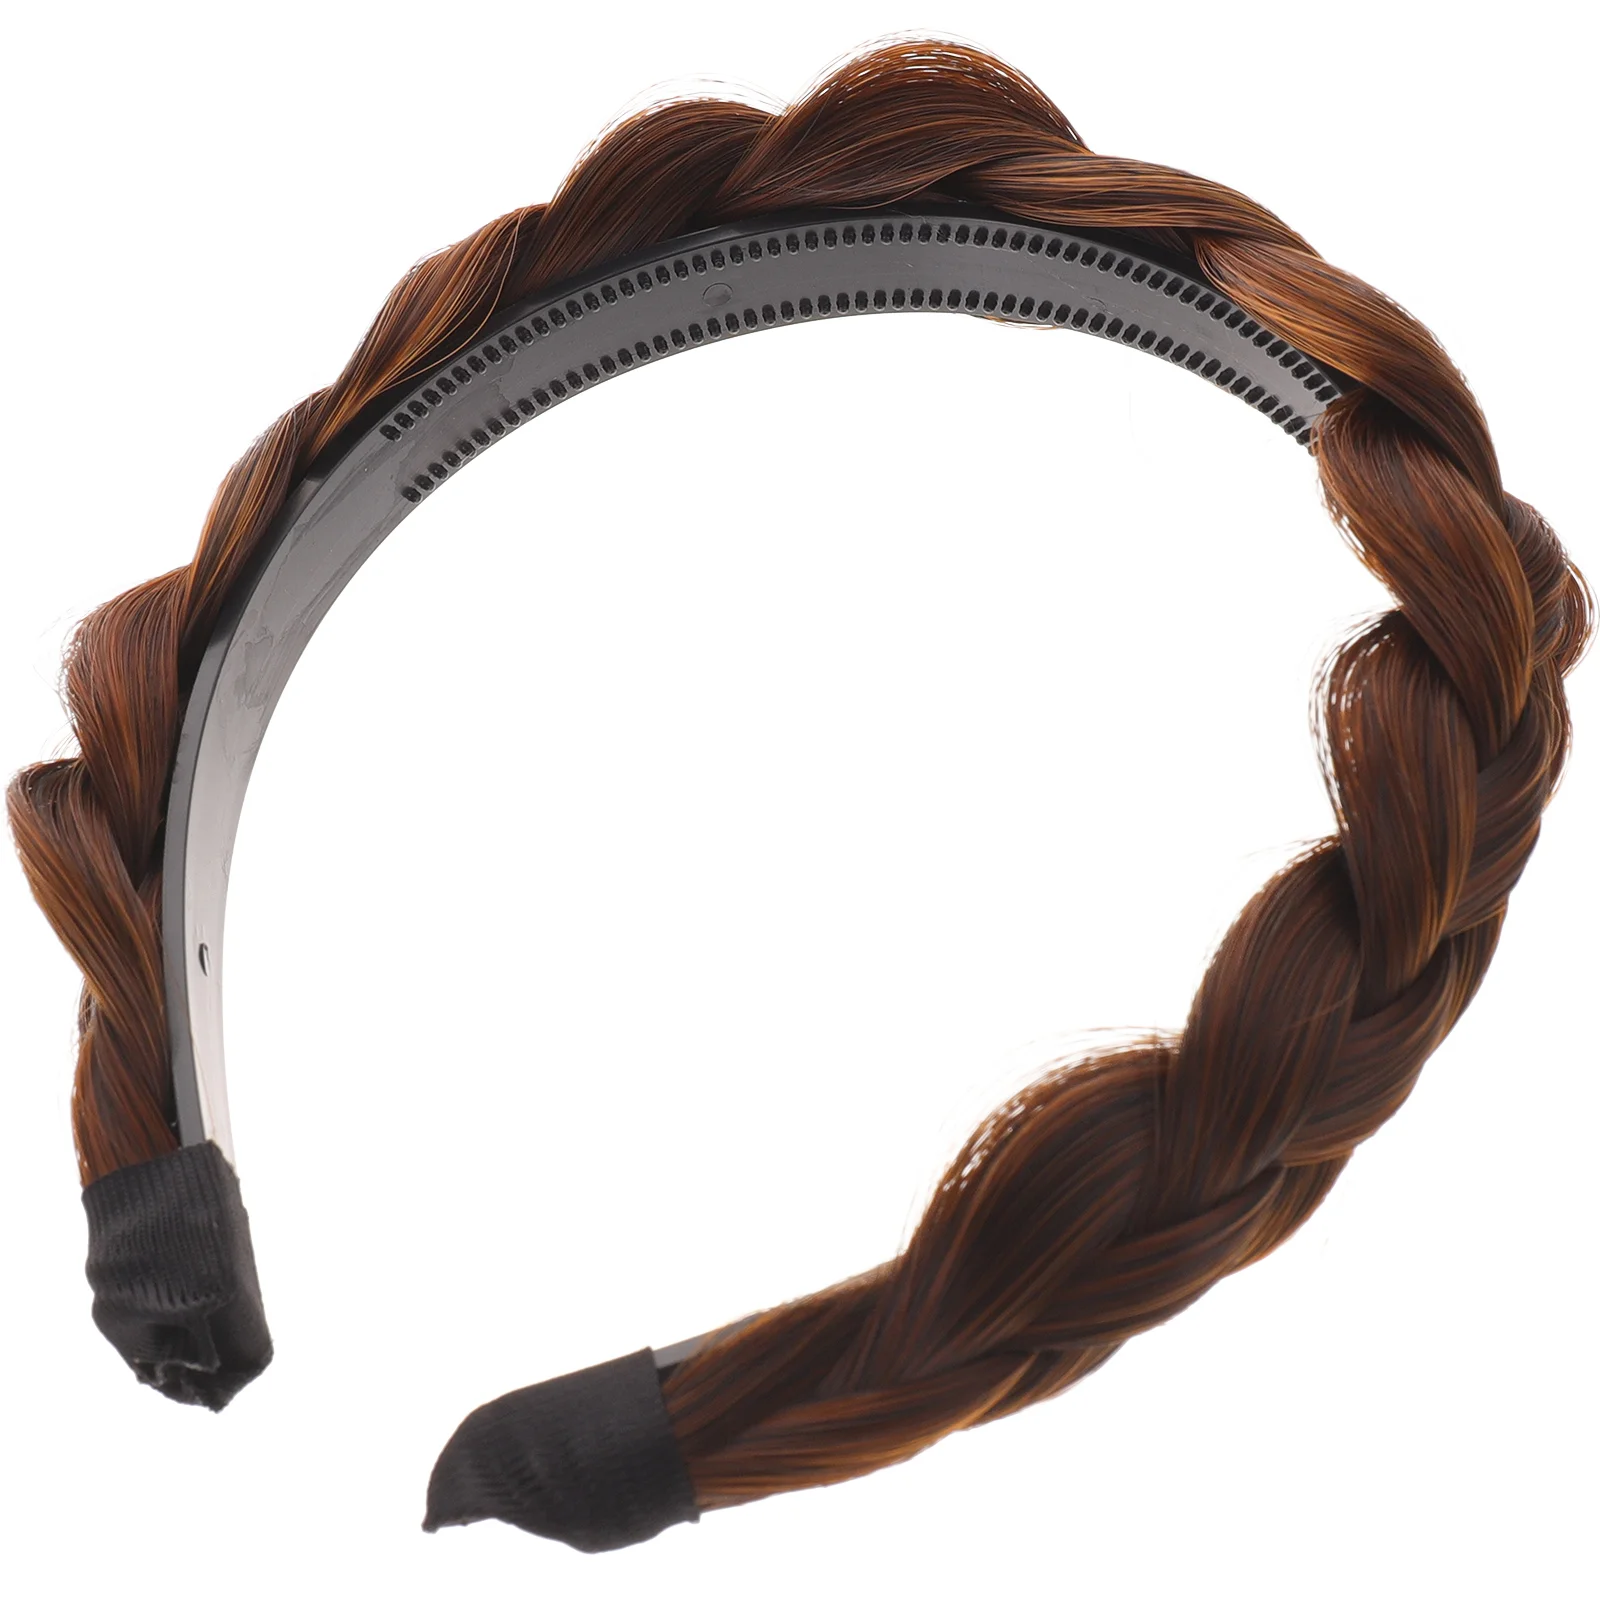 

Braid Headband Hair Supply Delicate Simple Style Girl Hairband Plaited Design Decorative Clasp Women Ornament Hoops Accessories